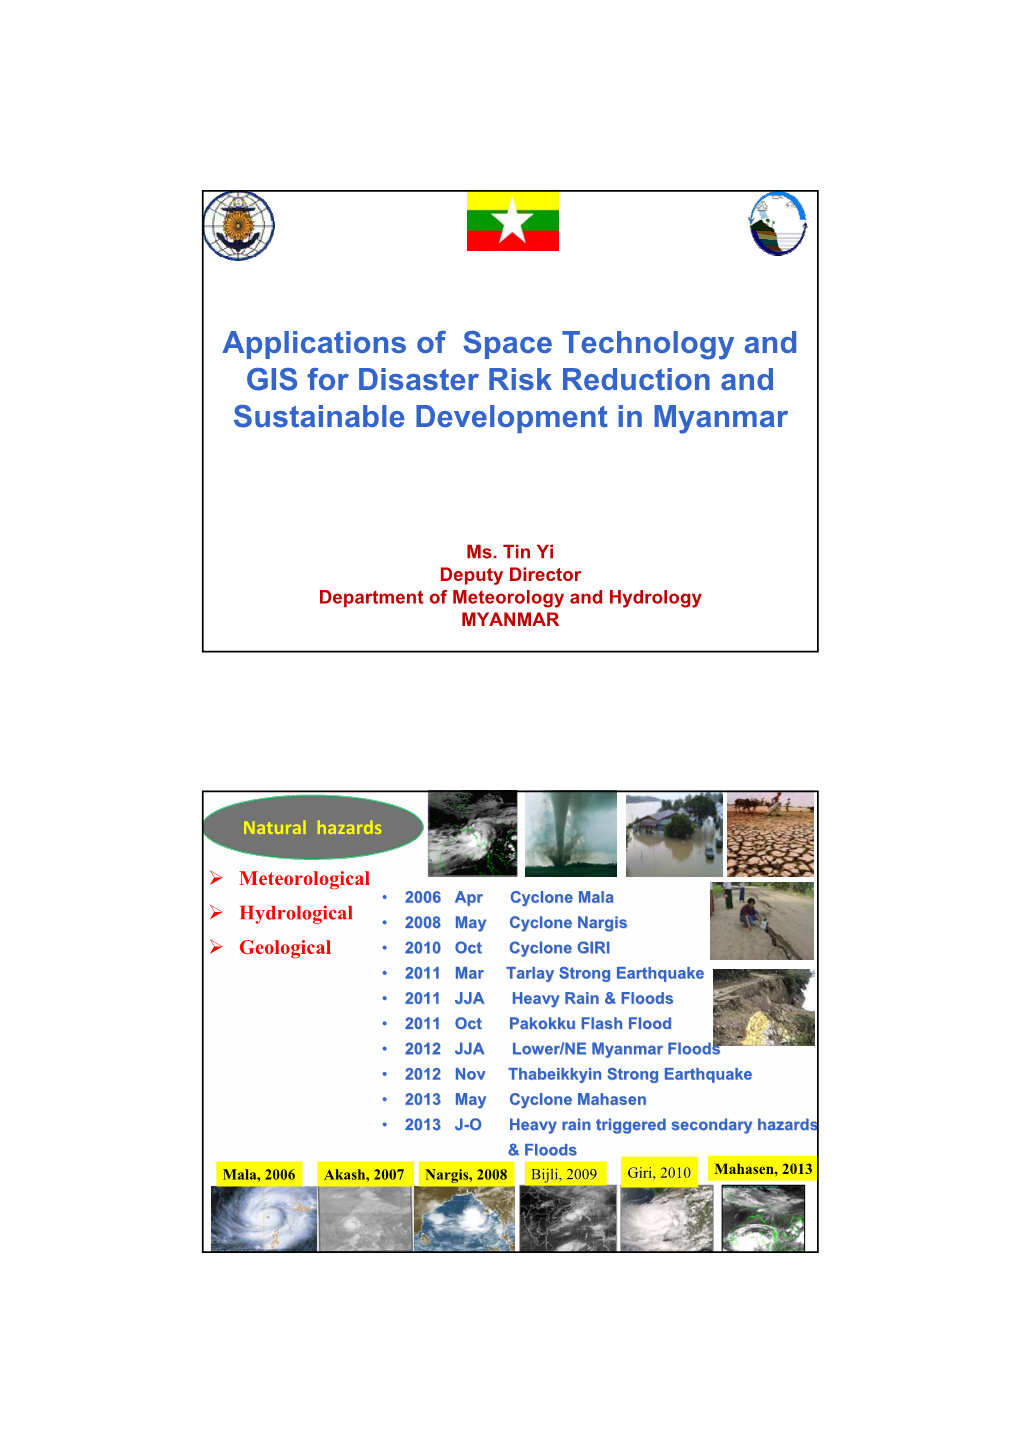 Applications of Space Technology and GIS for Disaster Risk Reduction and Sustainable Development in Myanmar